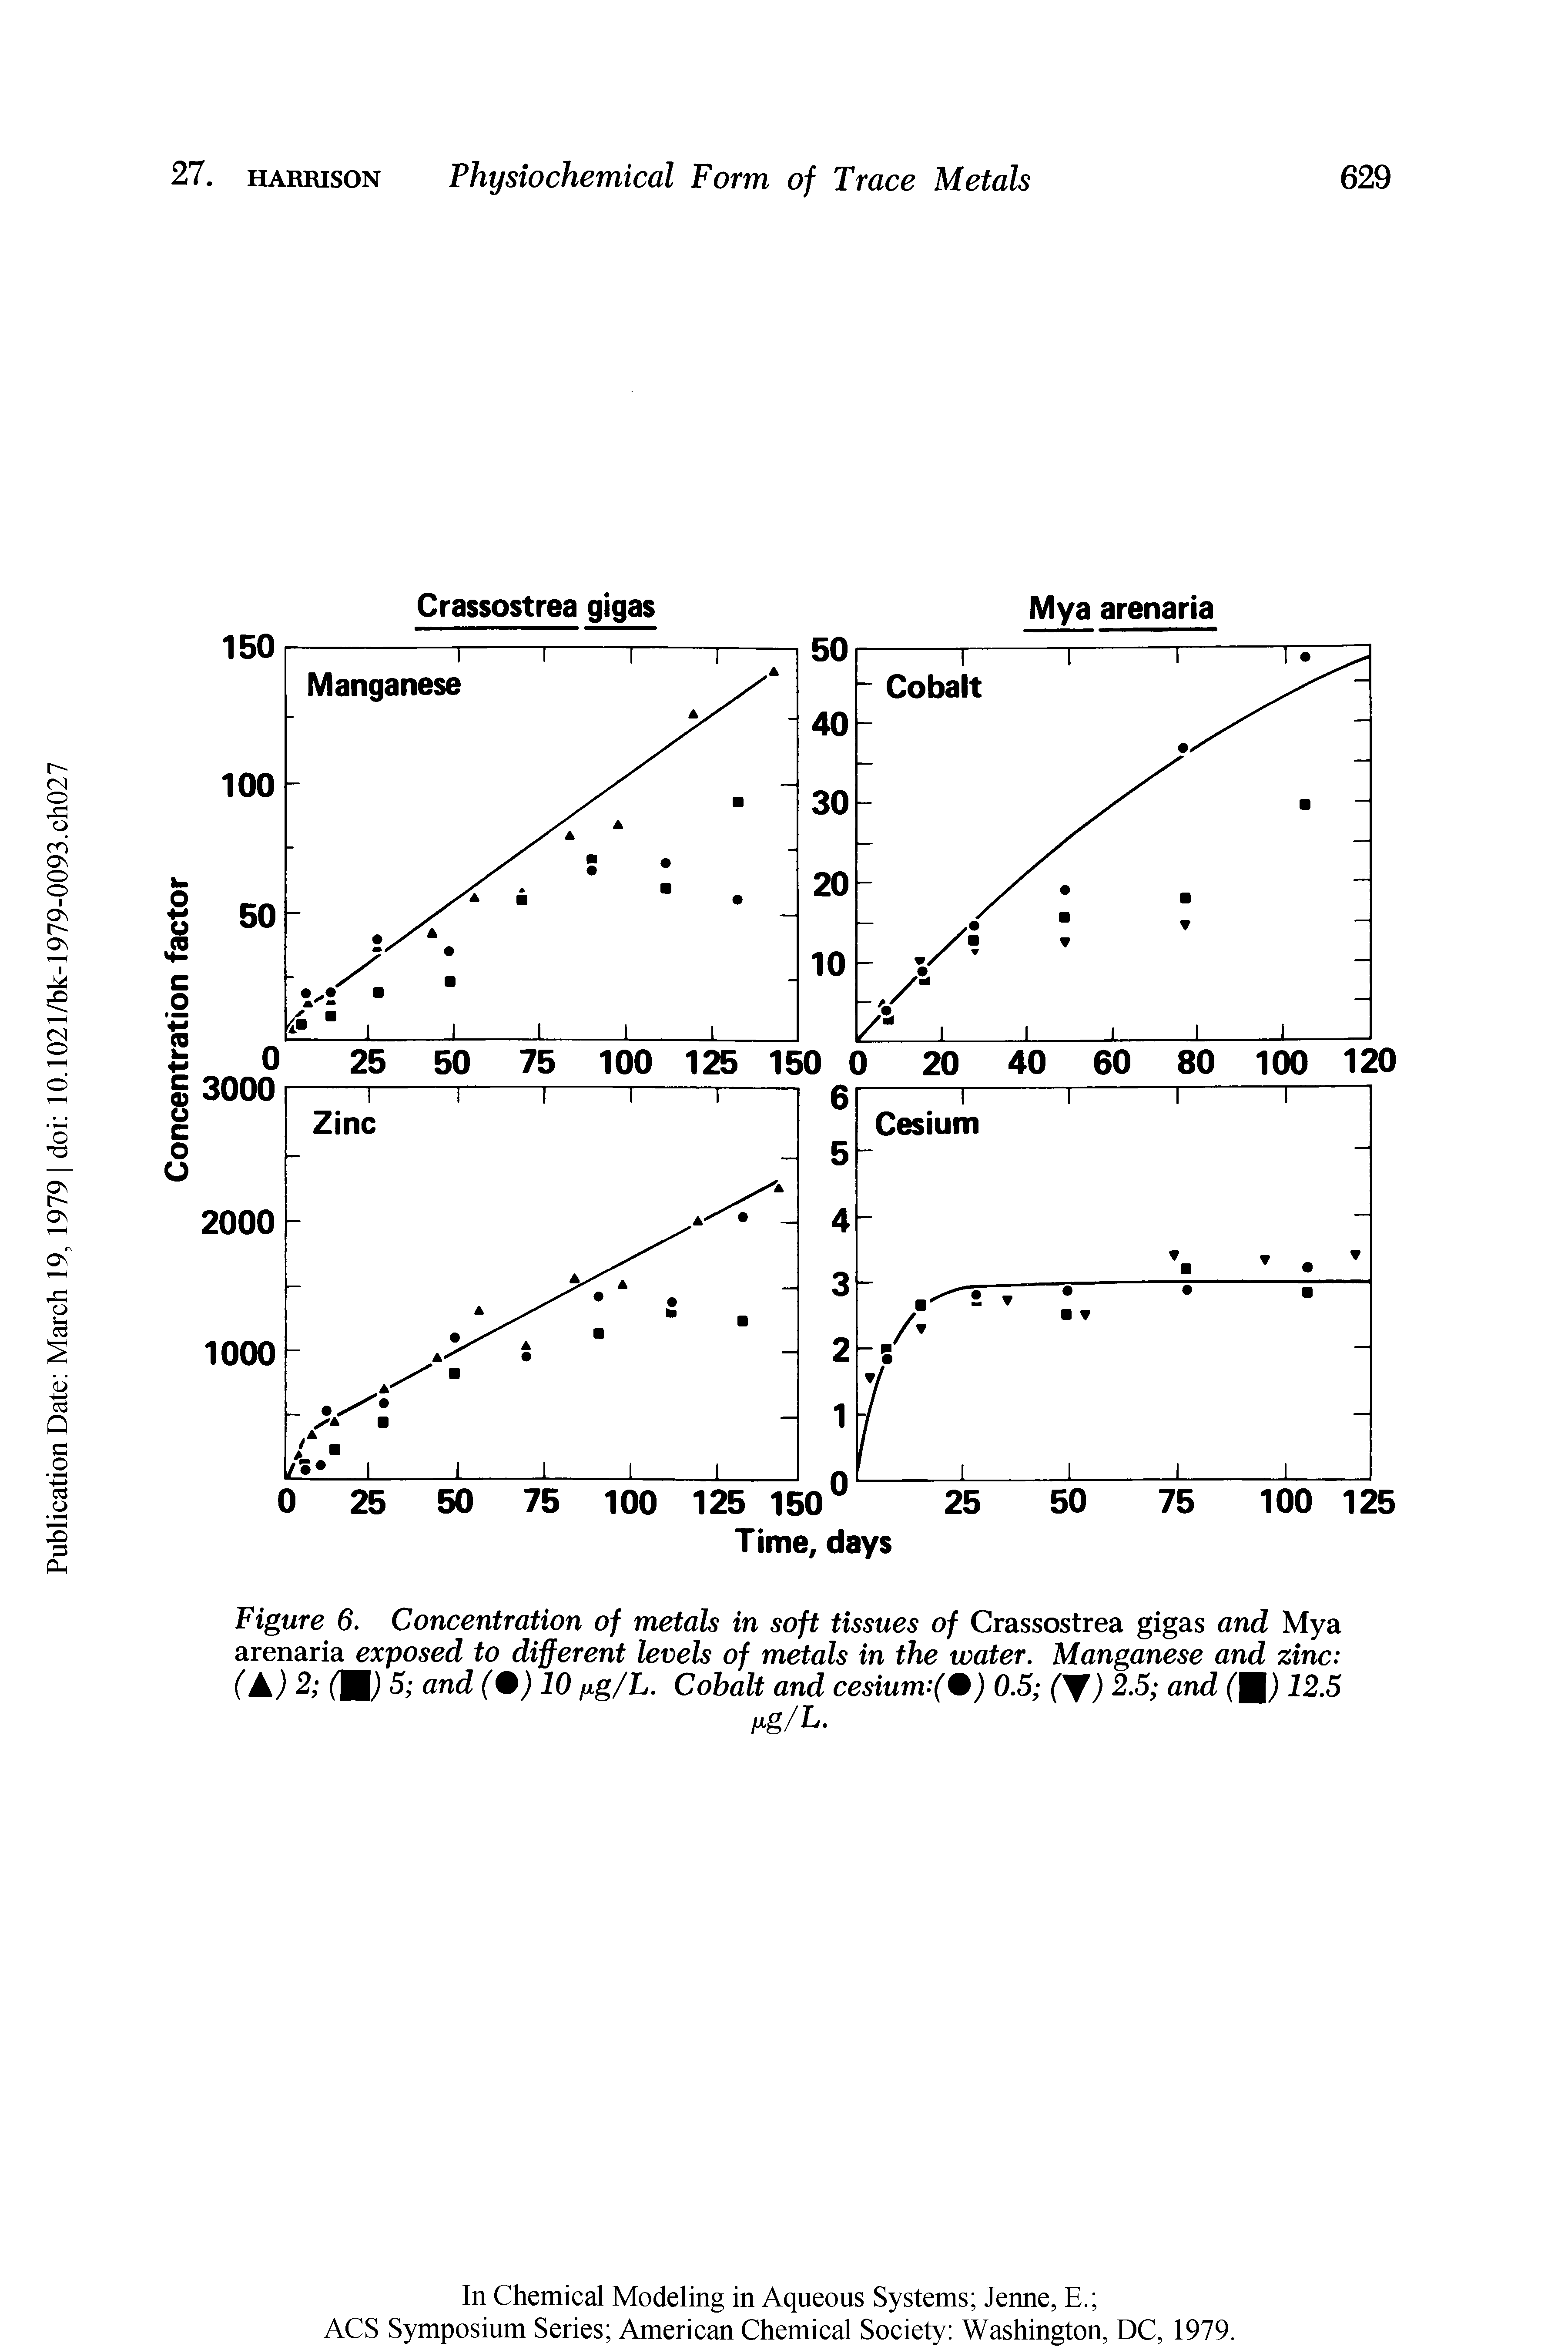 Figure 6. Concentration of metals in soft tissues of Crassostrea gigas and Mya arenaria exposed to different levels of metals in the water. Manganese and zinc ( ) M/) ( ) 10 fig/L. Cohalt and cesium (0.5 (Y) 2.5 and ( ) 12.5...